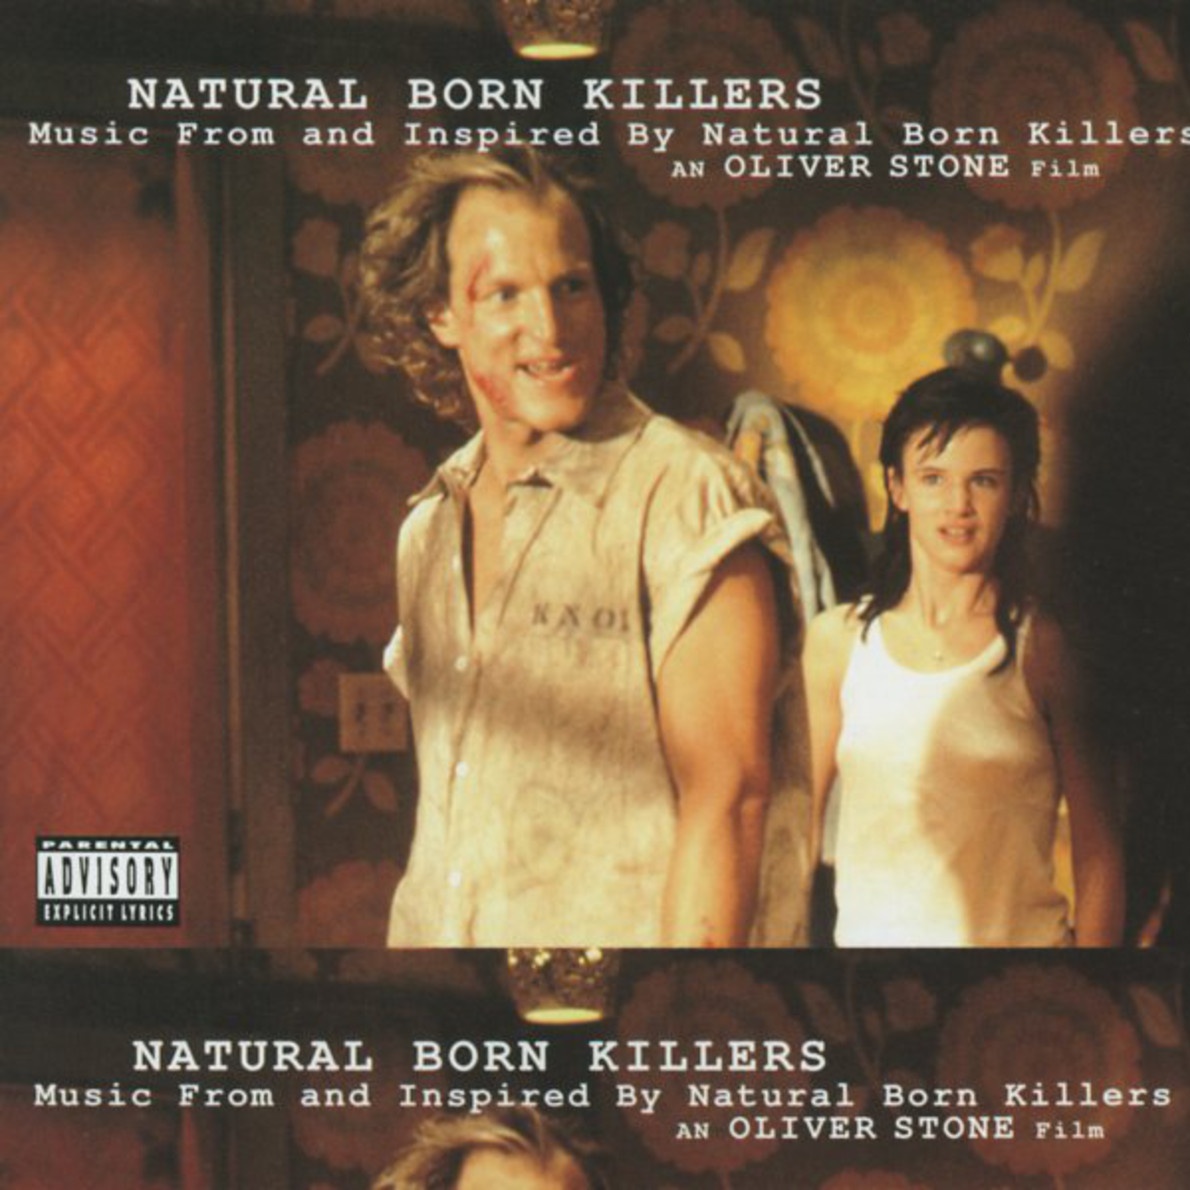 History (Repeats Itself) - From "Natural Born Killers" Soundtrack